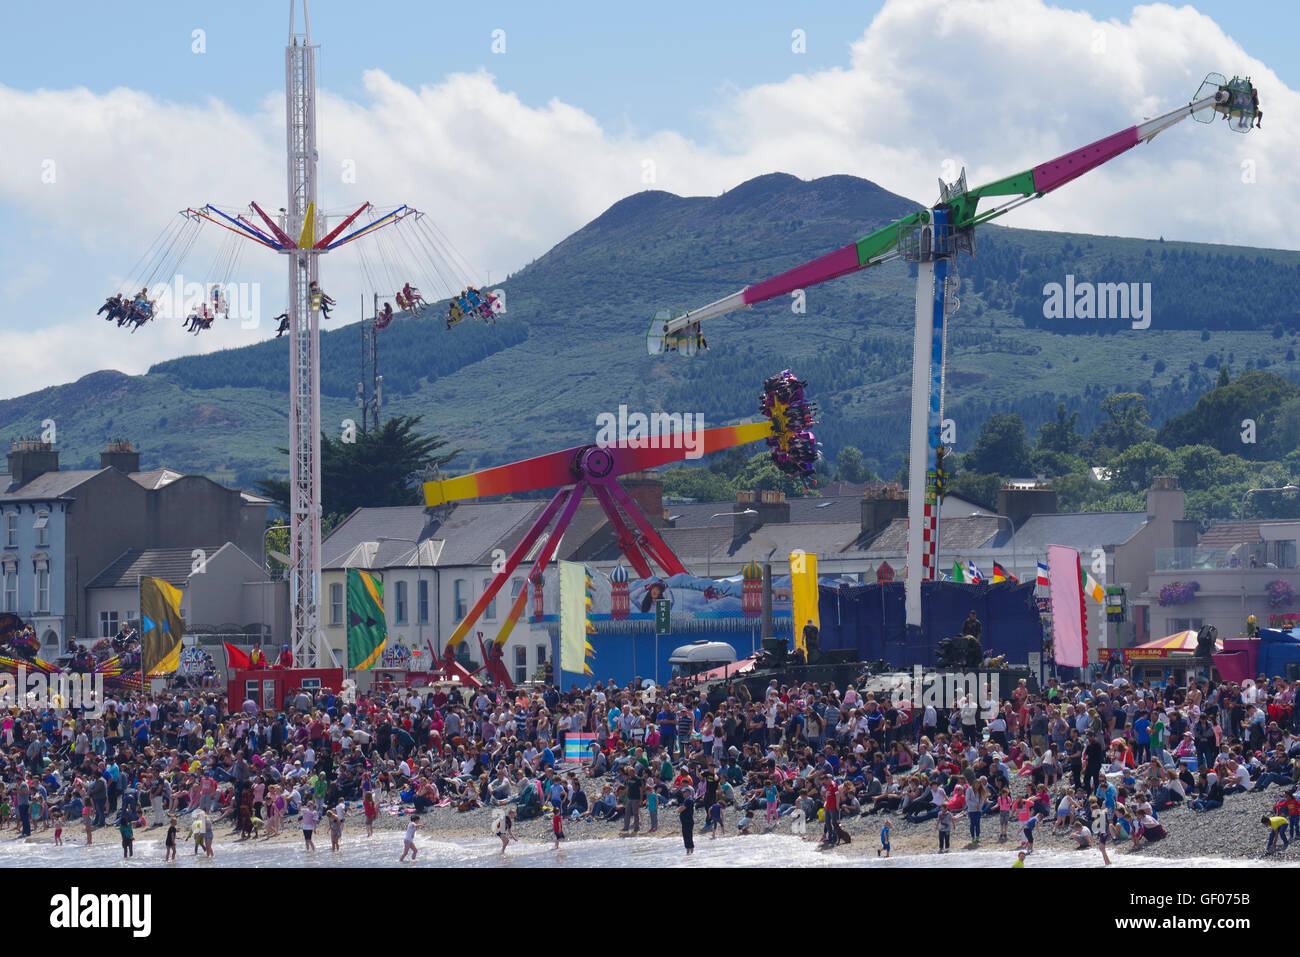 Bray Seafront Attractions during Airshow 2016 Stock Photo